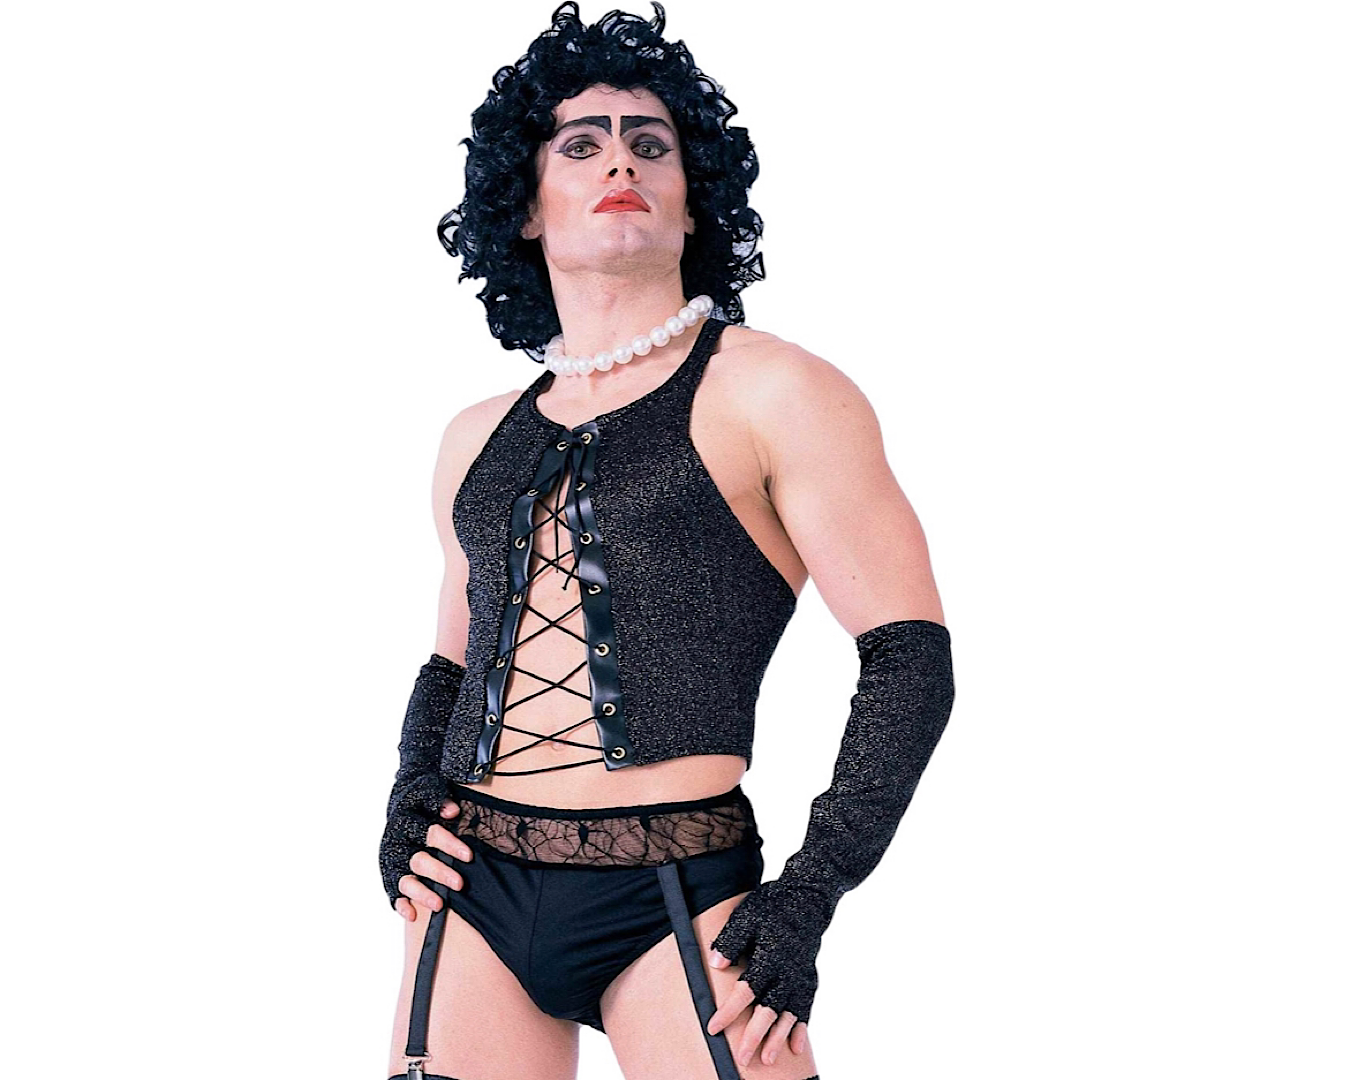 A person is wearing a Frank-n-Furter Halloween costume from the Rocky Horror Picture Show.